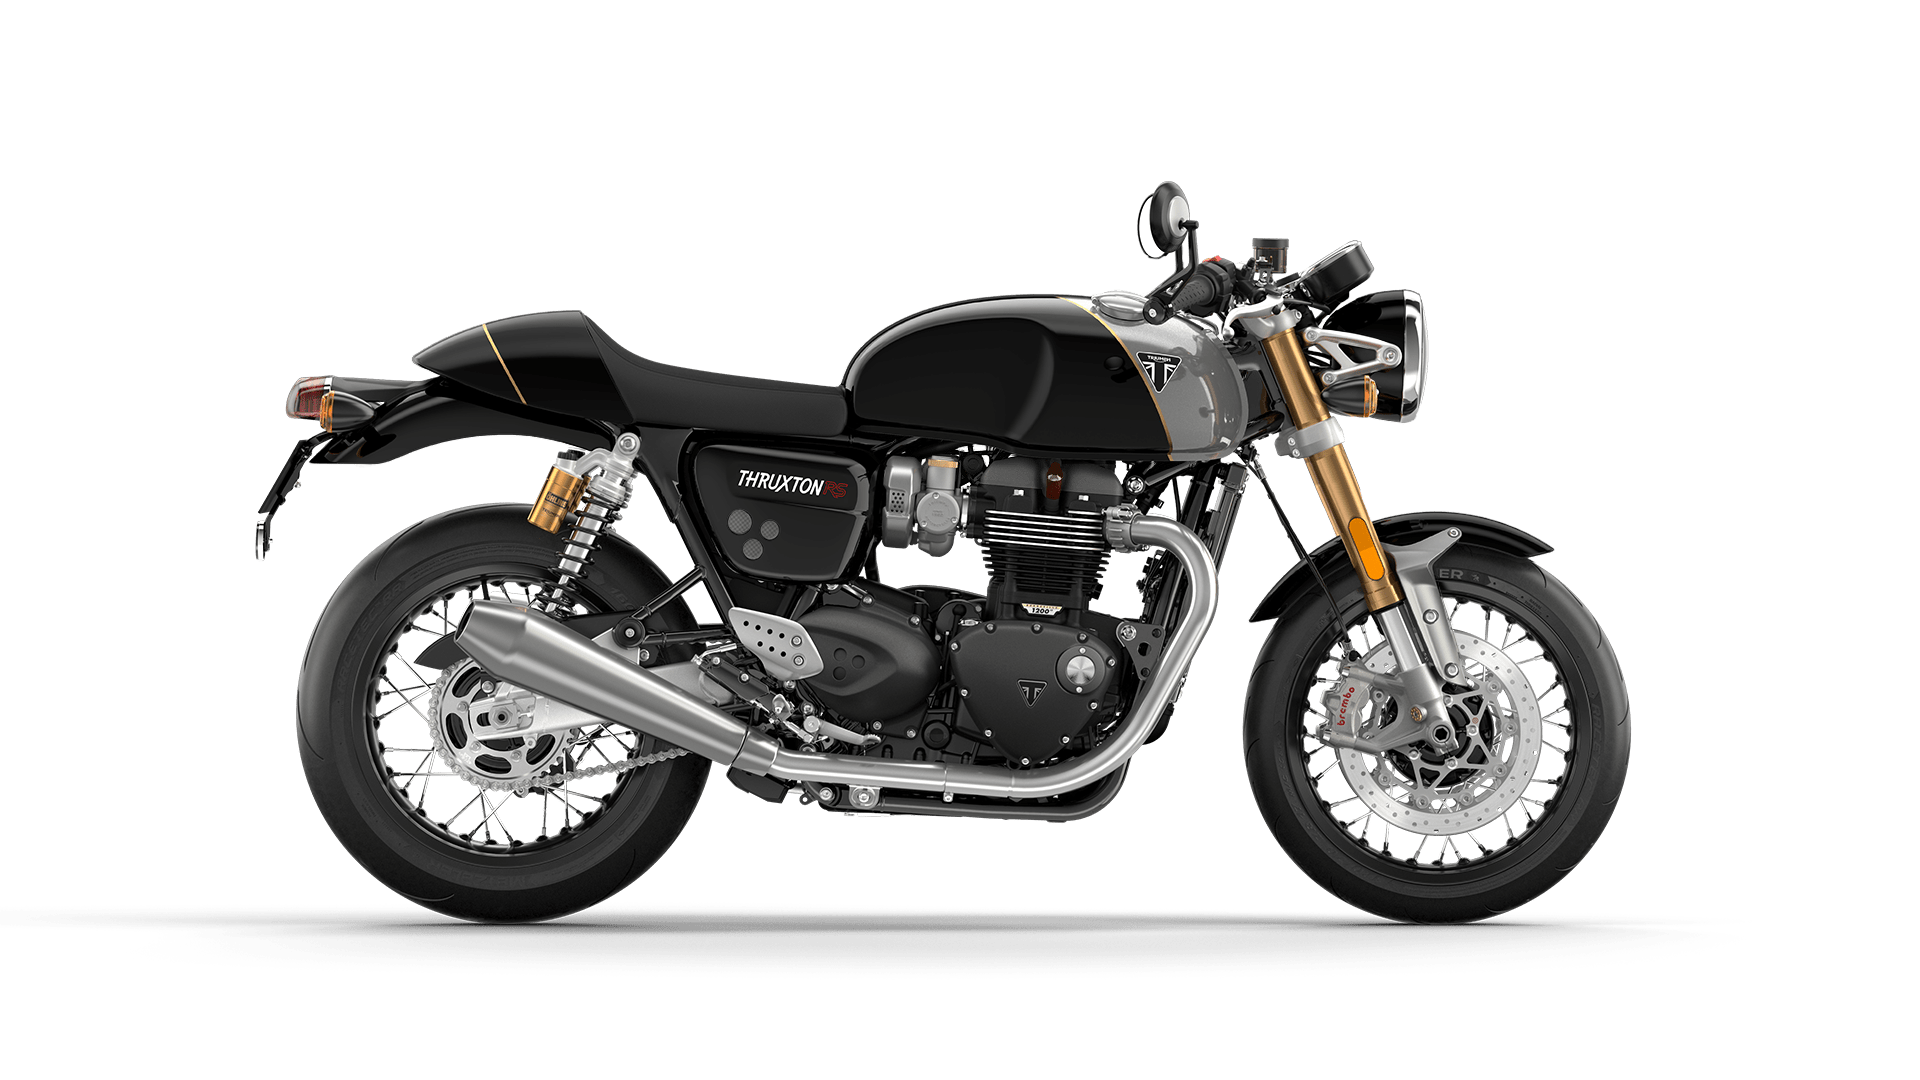 Accessorise your Triumph Motorcycle | For the Ride